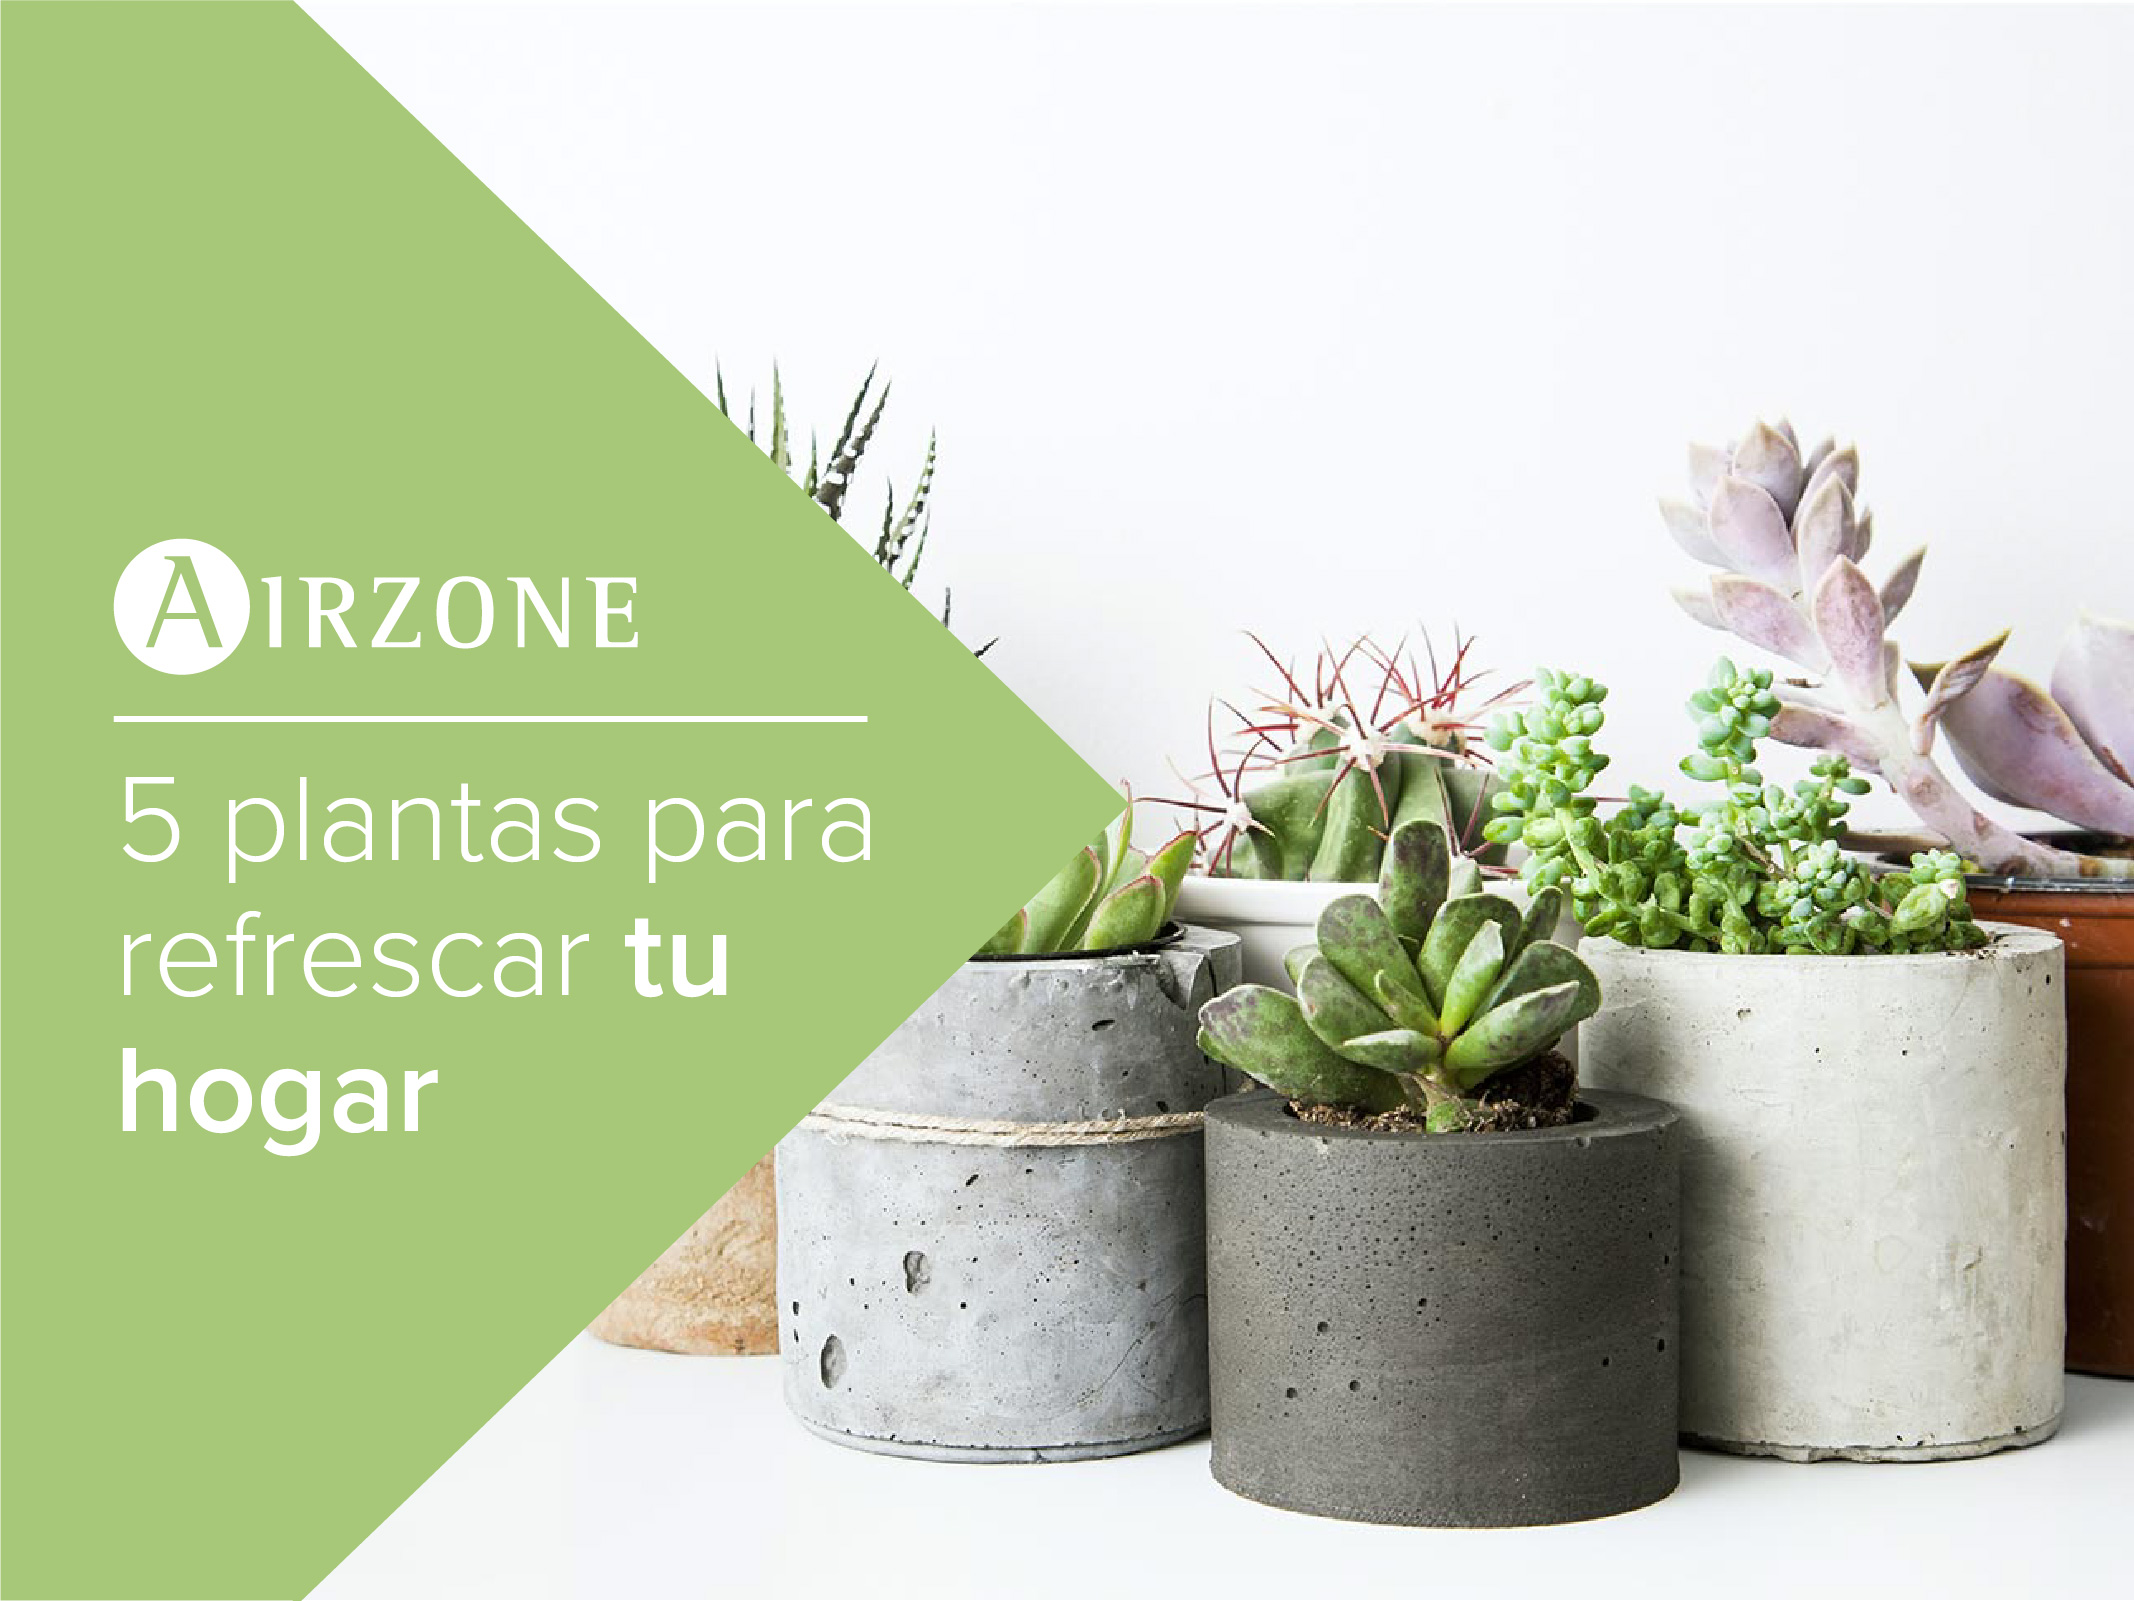 Airzone blog